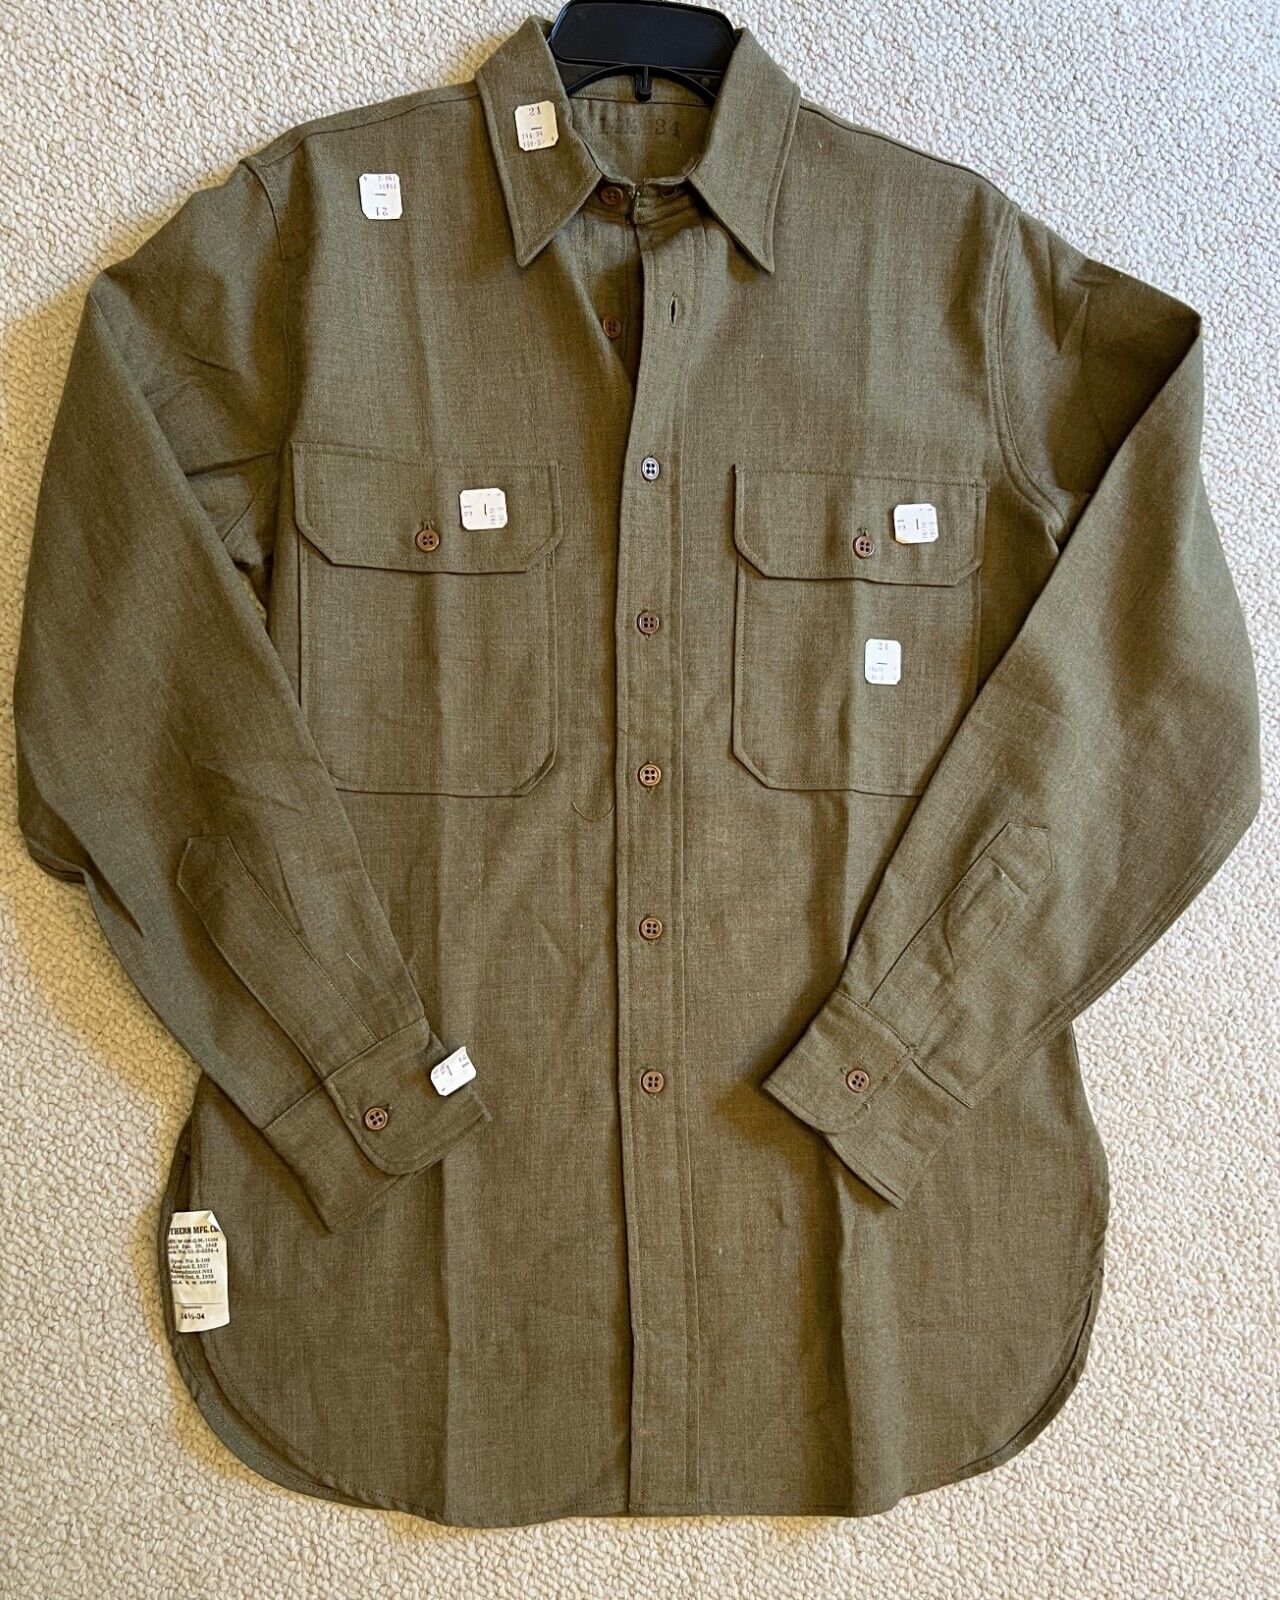 WWII US Army Shirt, authentic, NEW, with cutter tags attached.